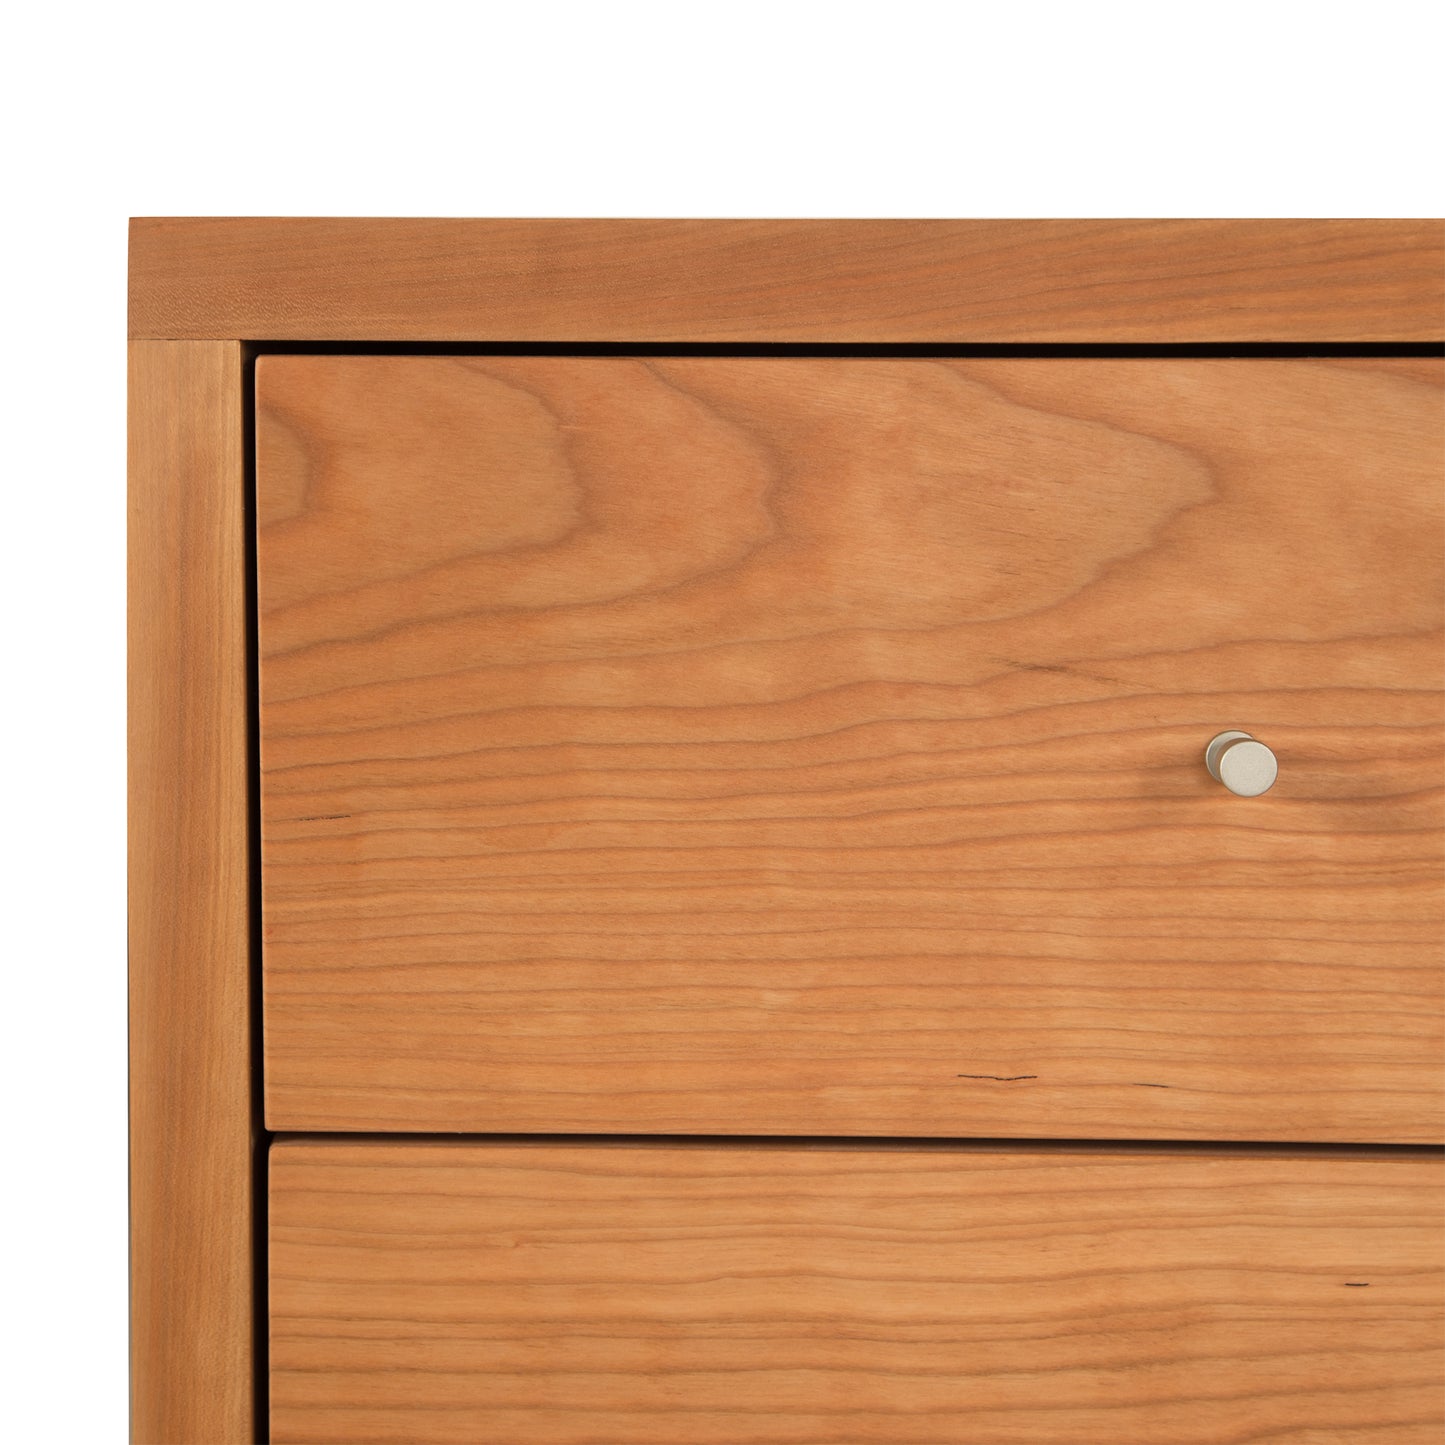 Close-up of the Vermont Furniture Designs Larssen 3-Drawer Nightstand drawer, showcasing the wood grain and joinery with a simple knob, crafted from natural hardwoods.